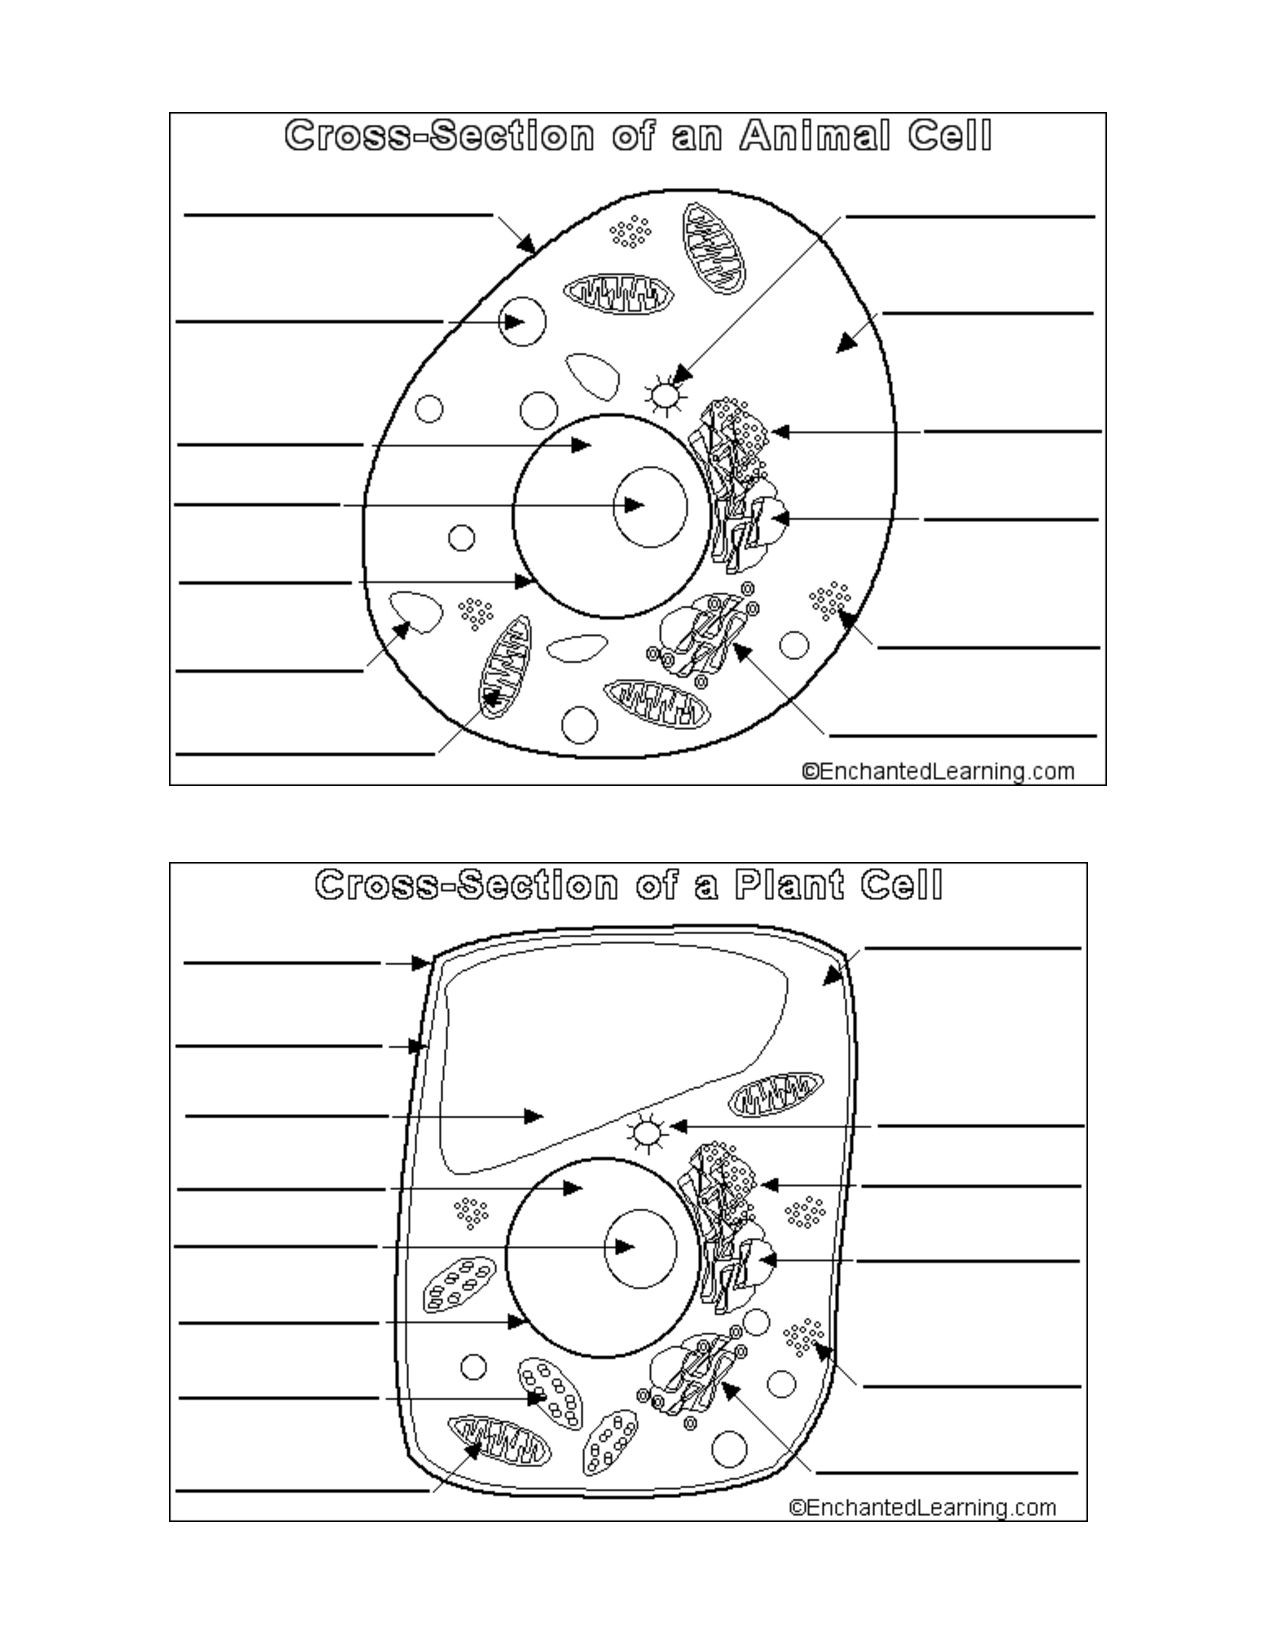 Cross Section Worksheet 7th Grade Perfect Animal and Plant Cells Worksheet 61 for Animal Cell